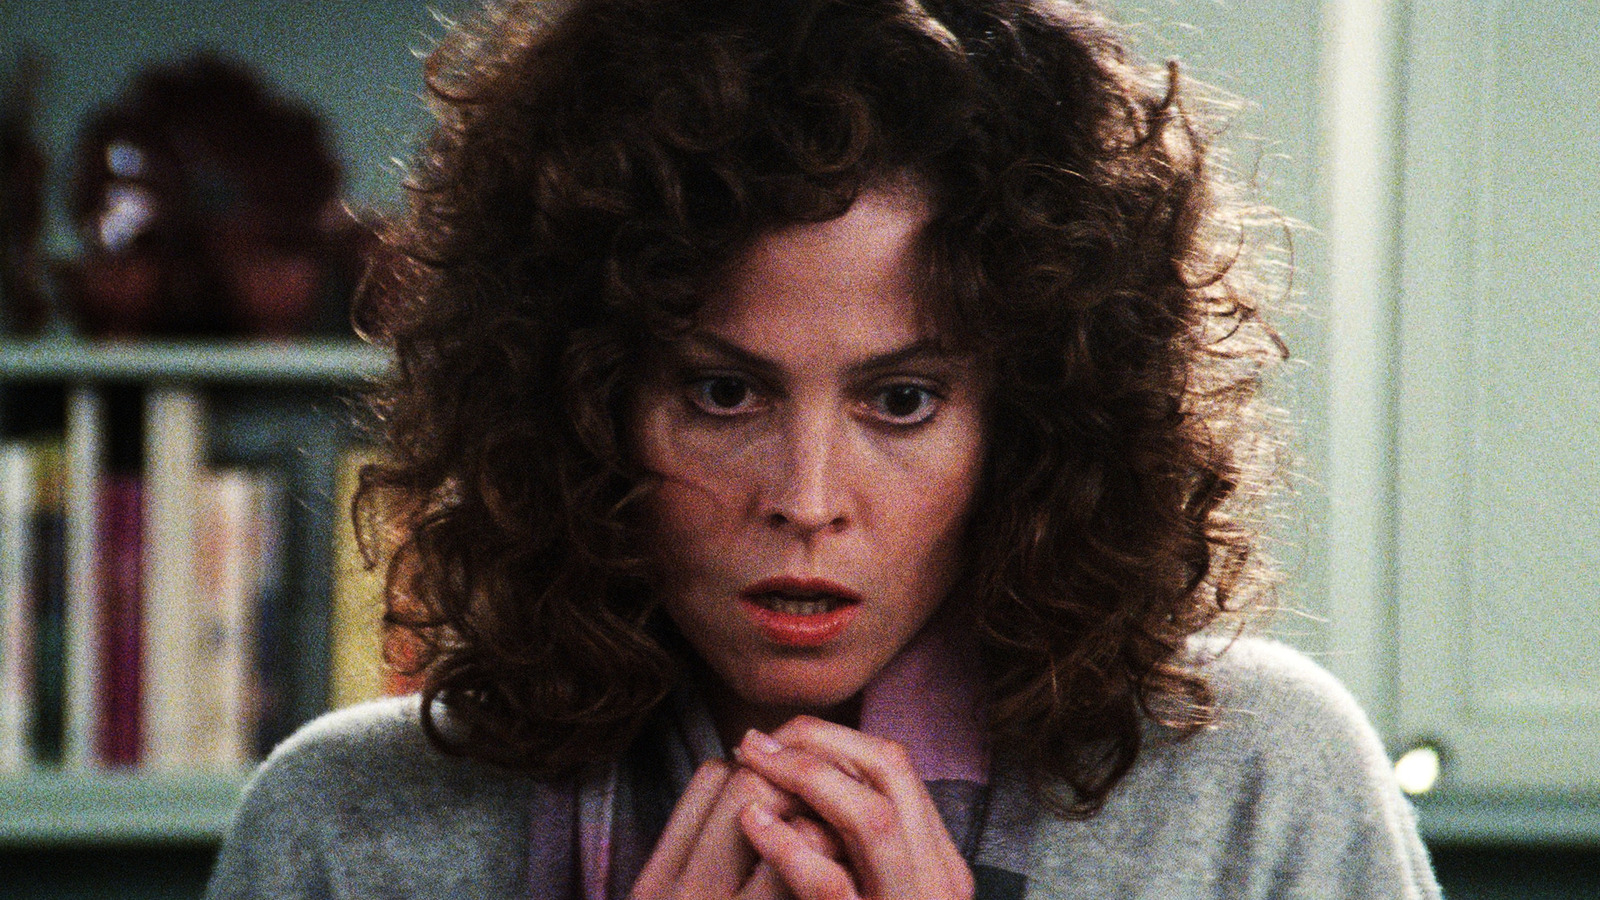 "Sigourney Weaver in Ghostbusters"